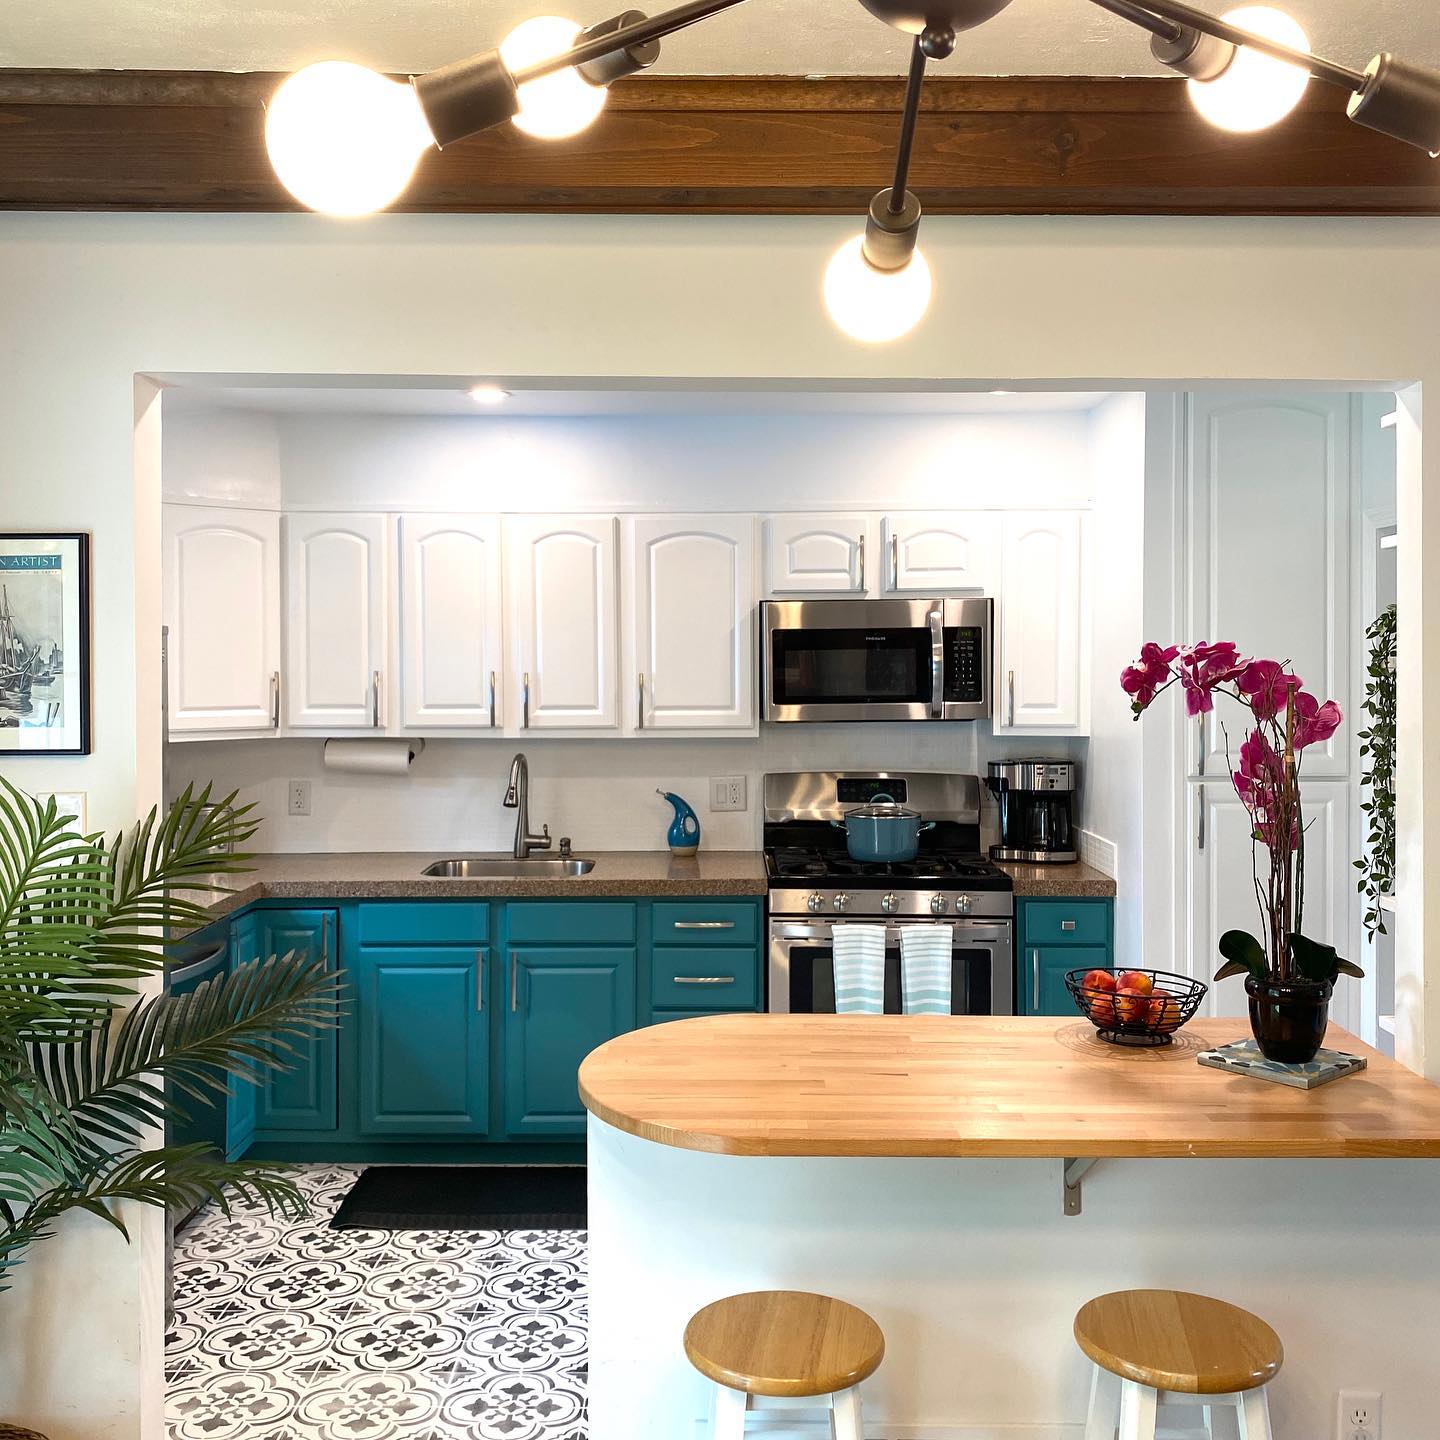 A kitchen with turquoise cabinets and stools.